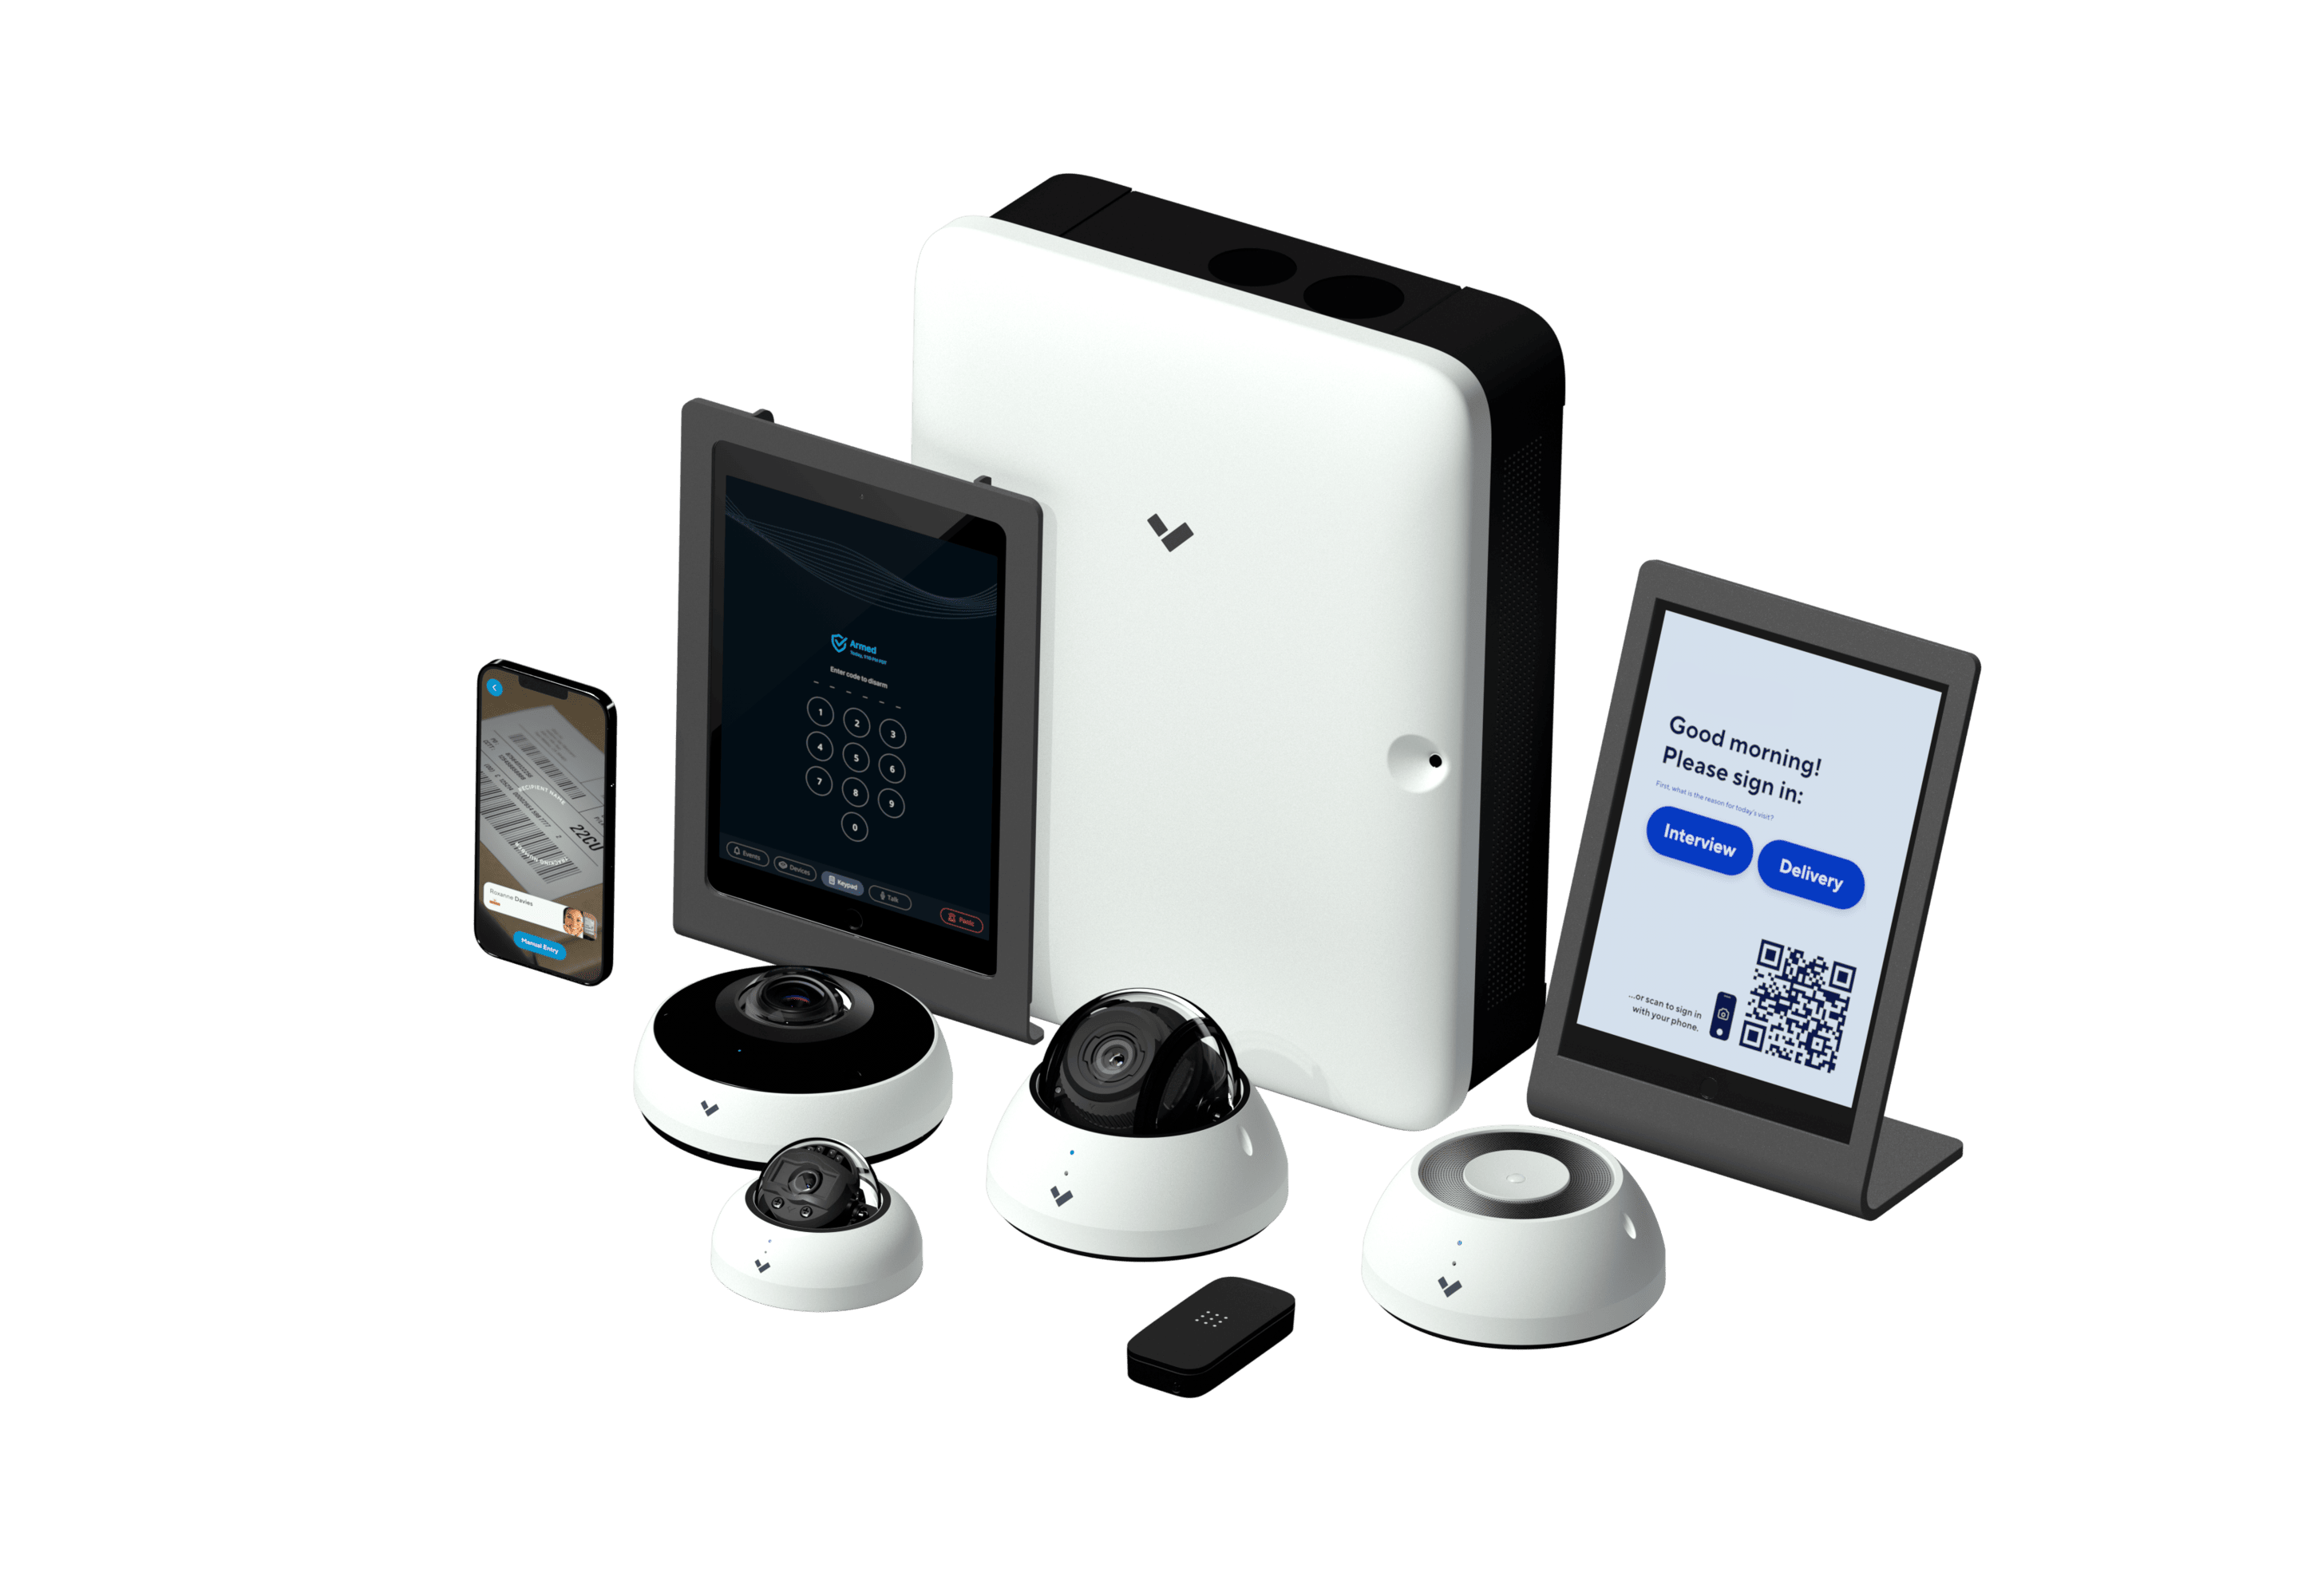 Verkada device family for security solutions in Chicago